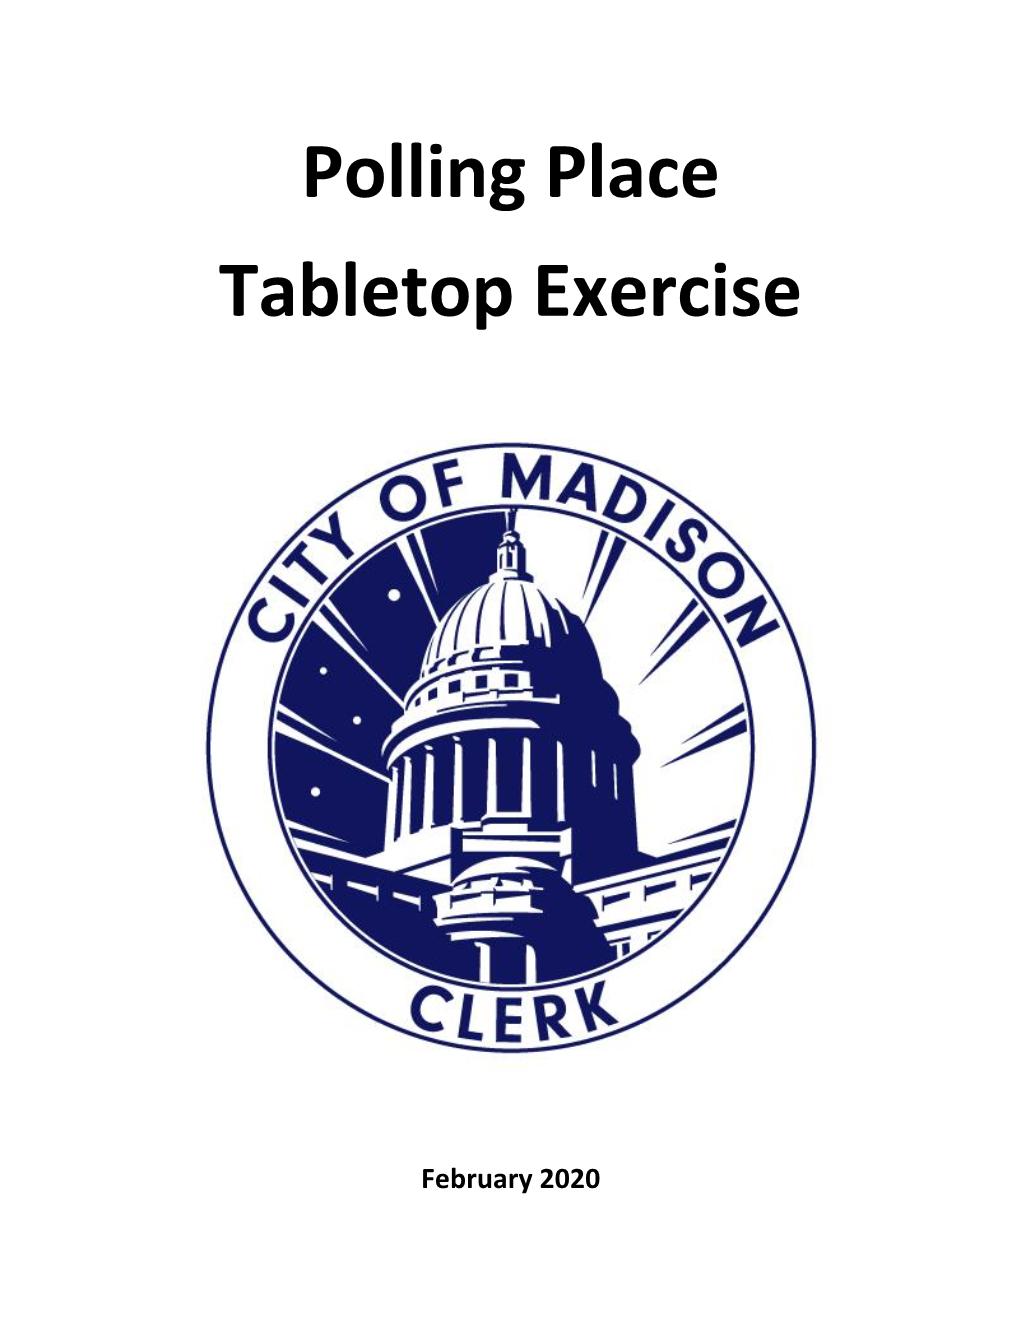 Polling Place Tabletop Exercise